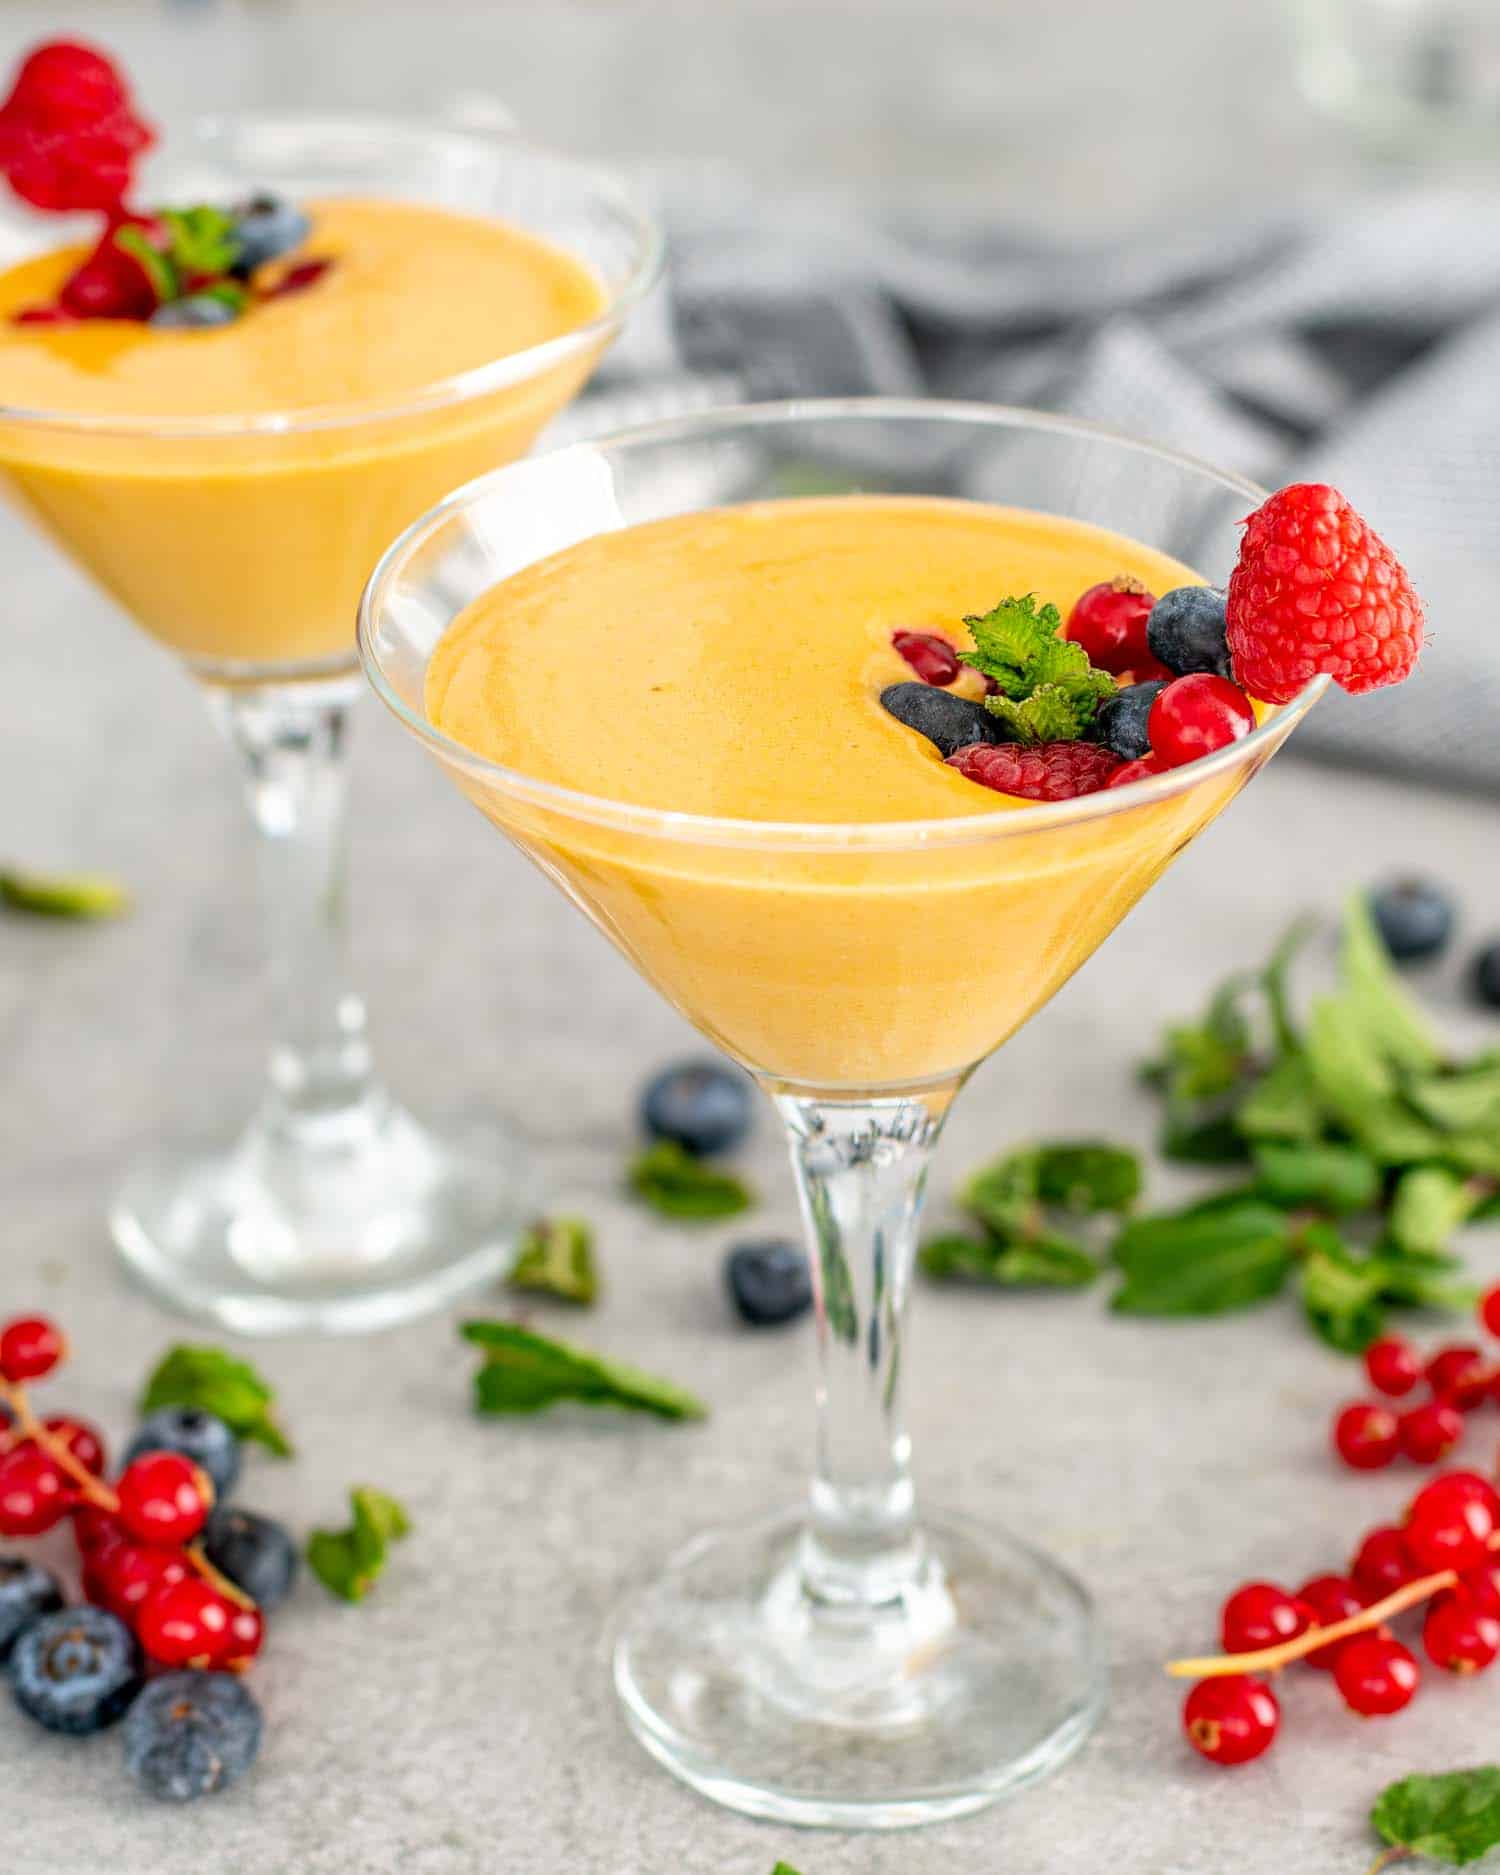 zabaglione in 2 glasses topped with berries.